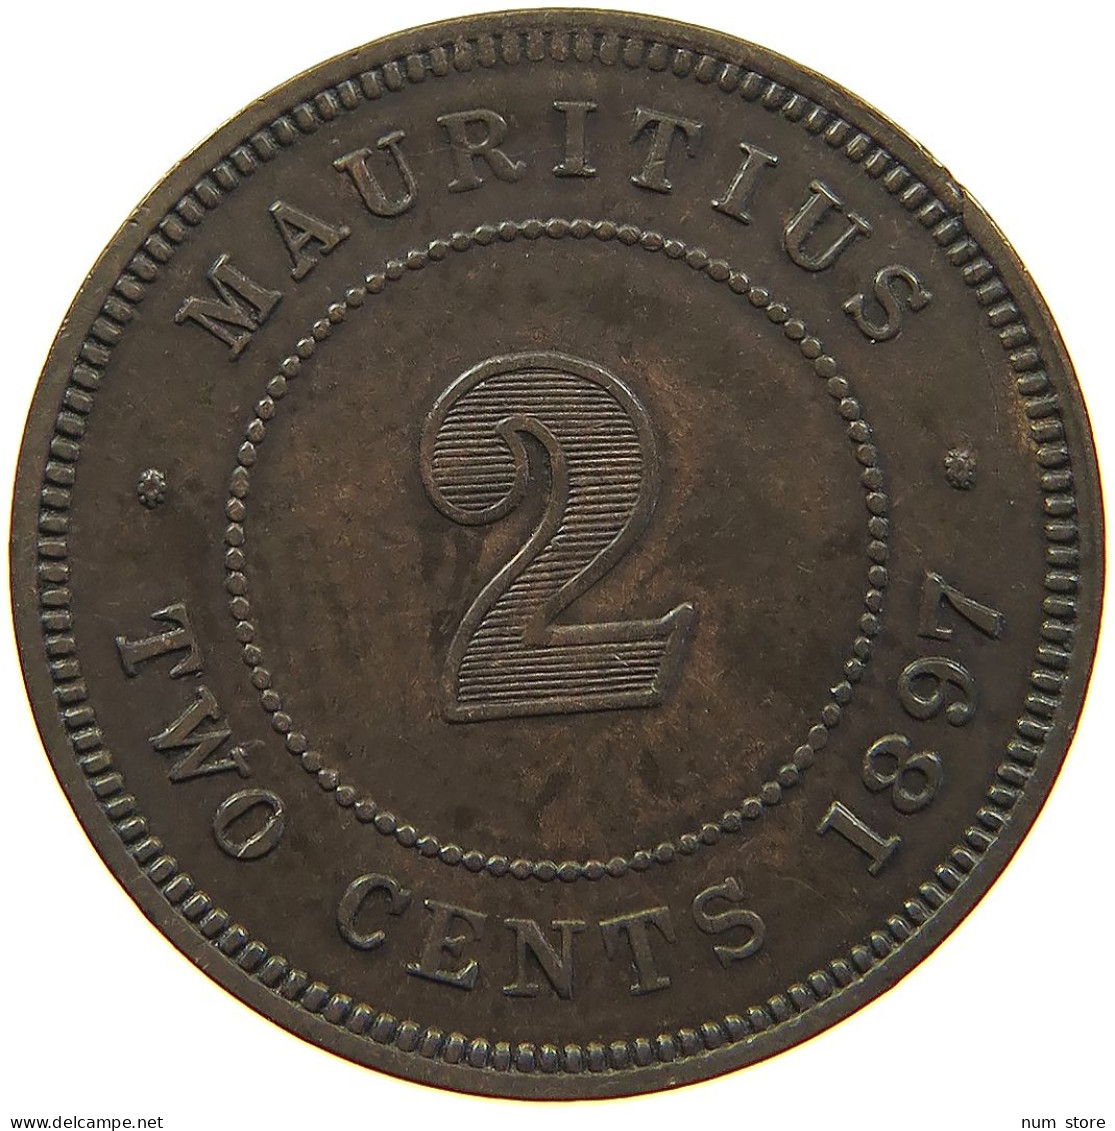 MAURITIUS 2 CENTS 1897 Victoria 1837-1901 #t018 0061 - Maurice